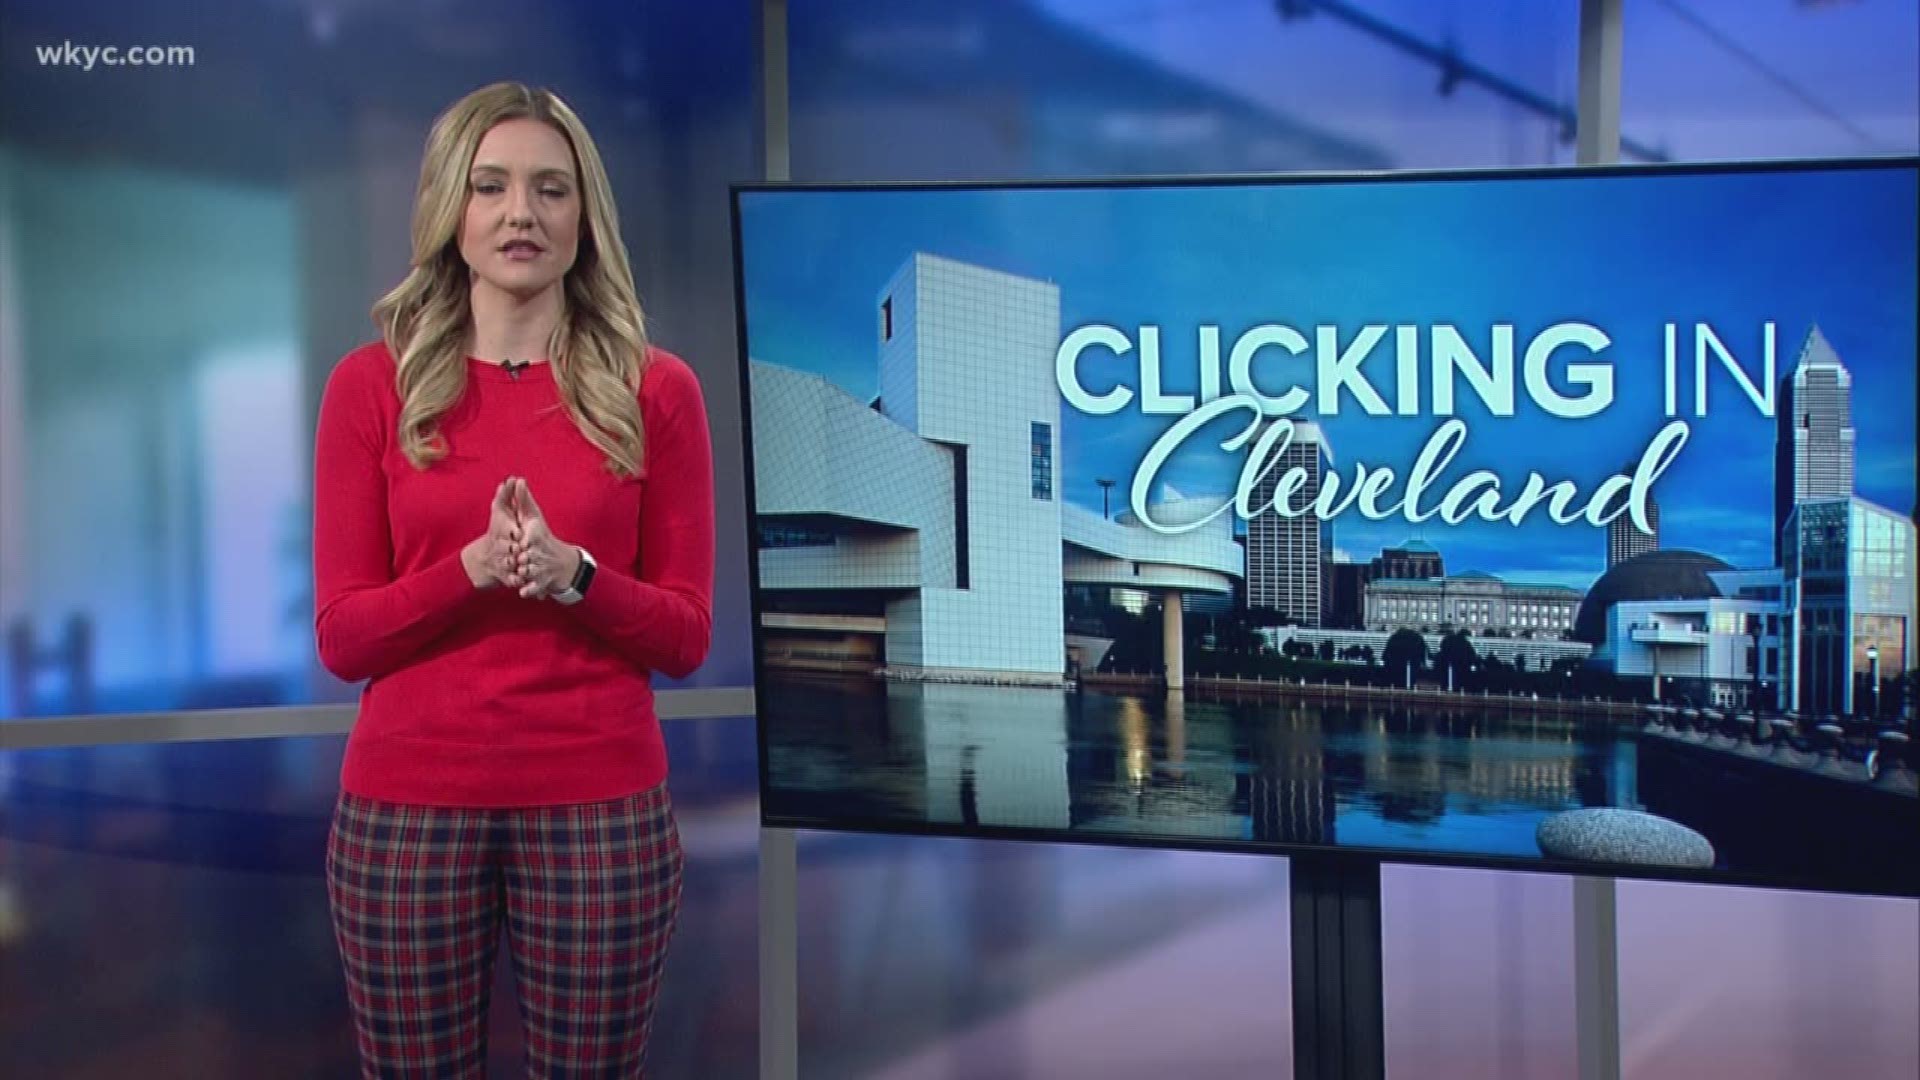 Digital anchor Stephanie Haney shows us what's trending in Cleveland on January 22, 2020.